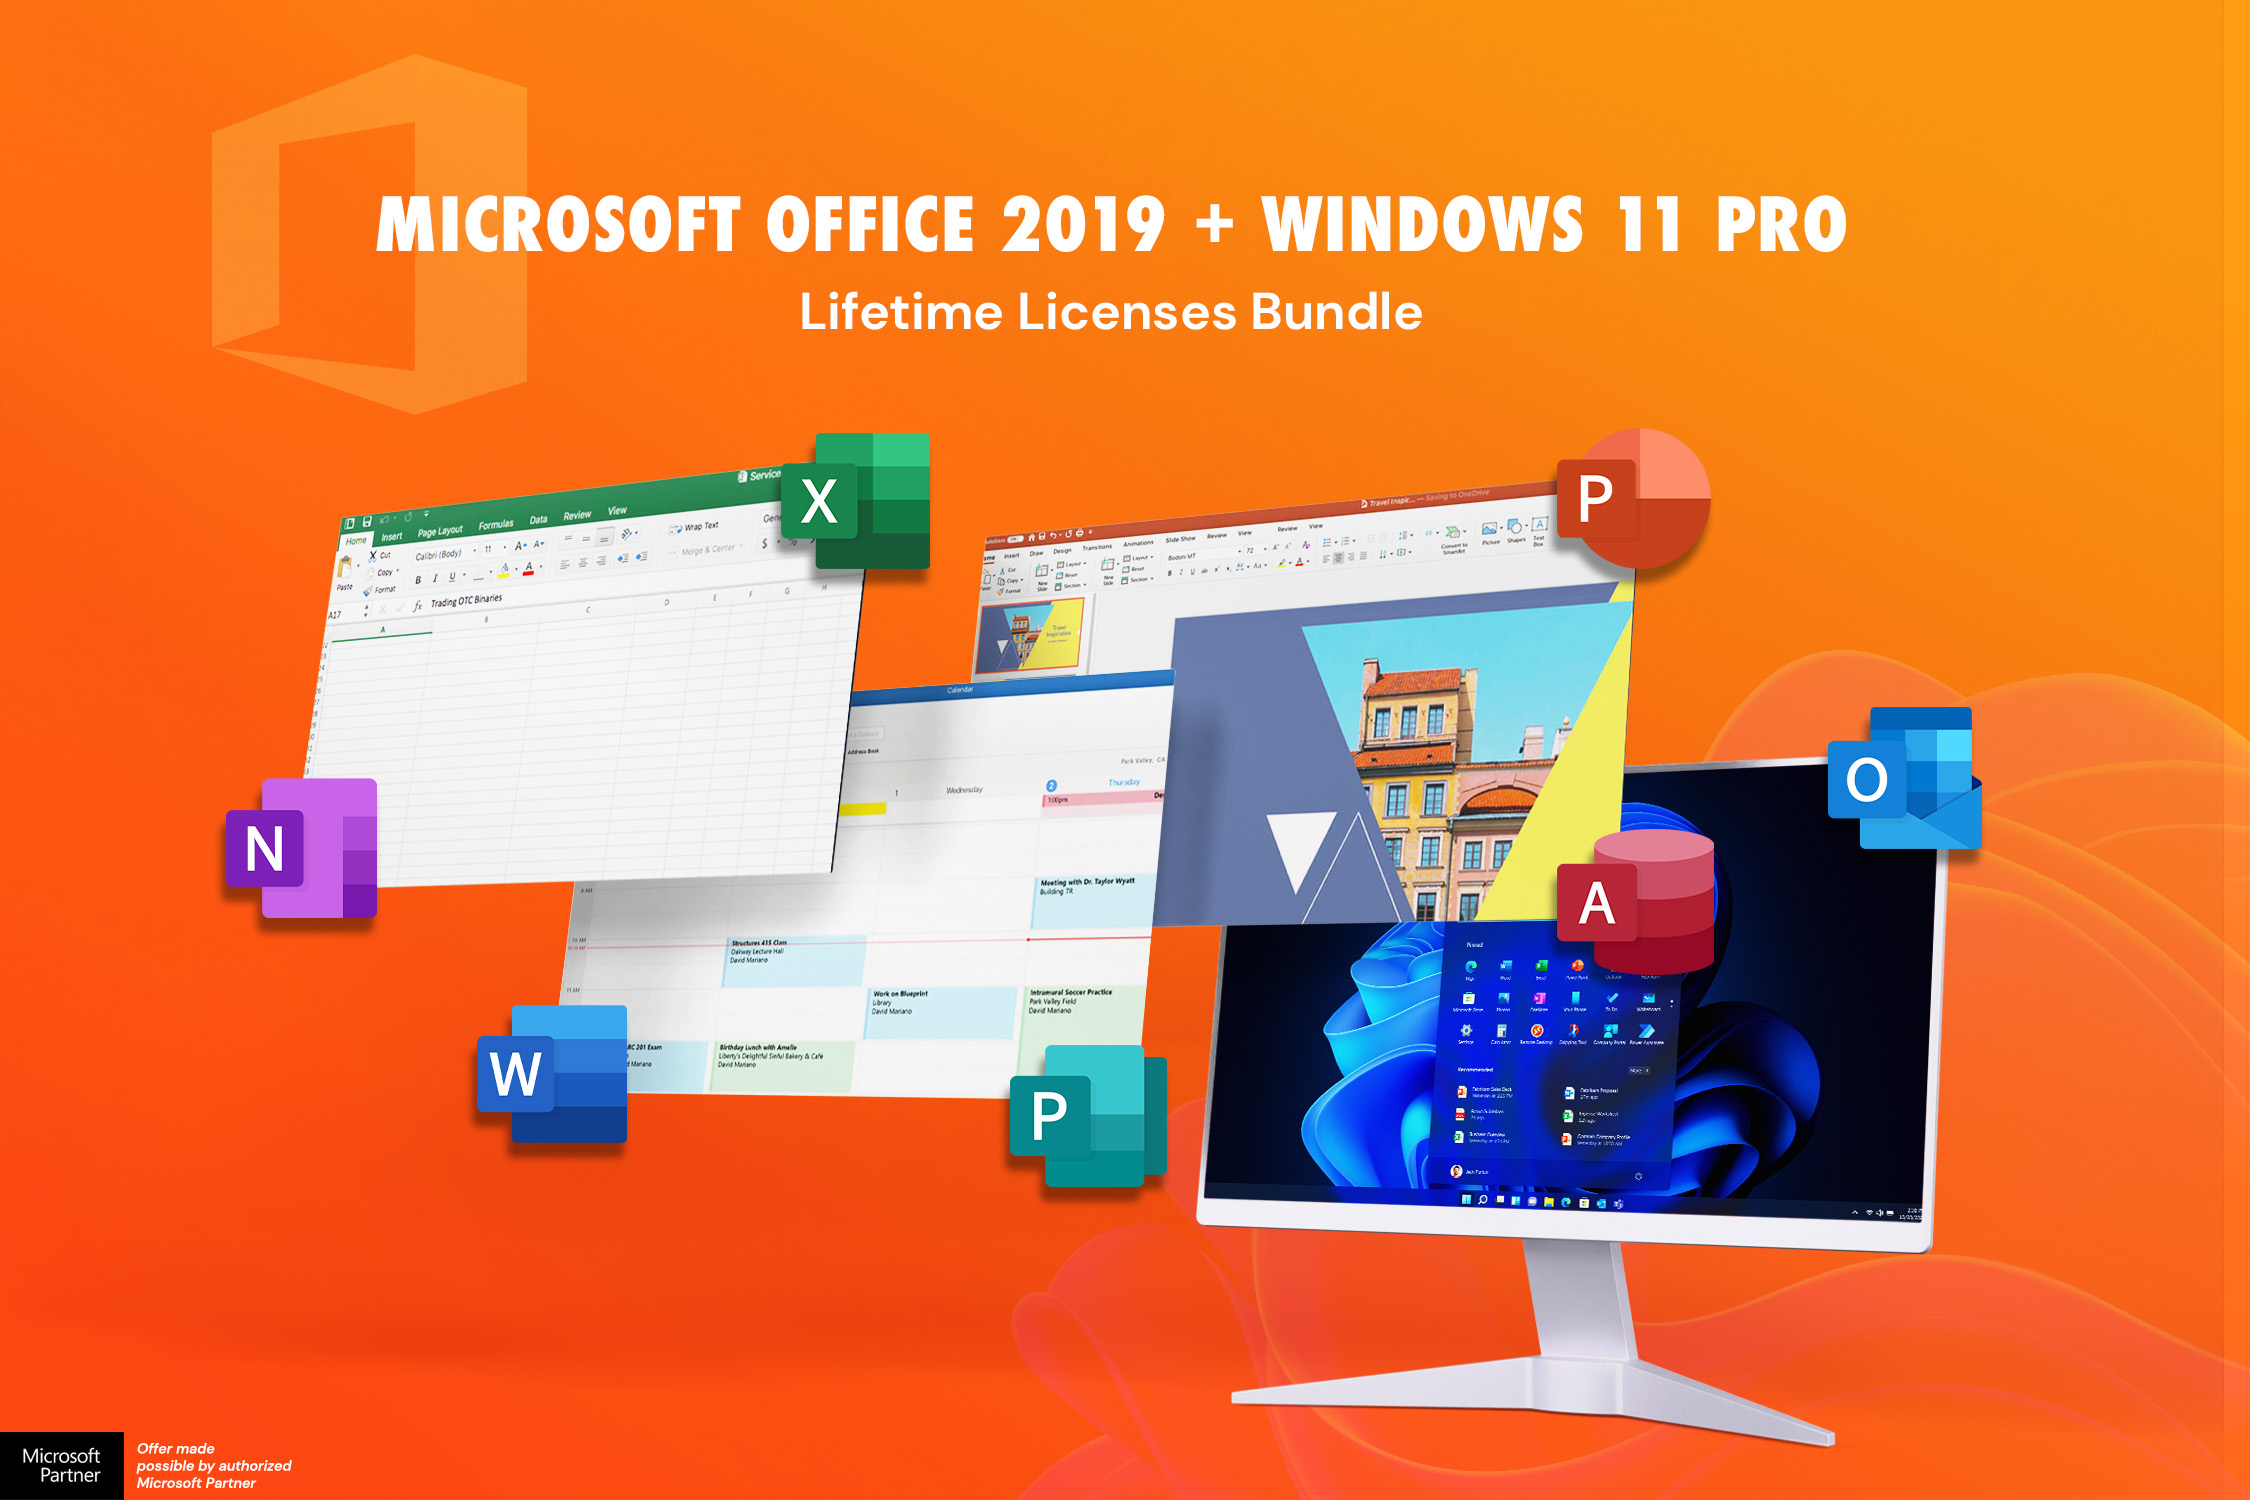 Get Microsoft Office 2019 & Windows 11 Pro for under $50 with this limited-time offer